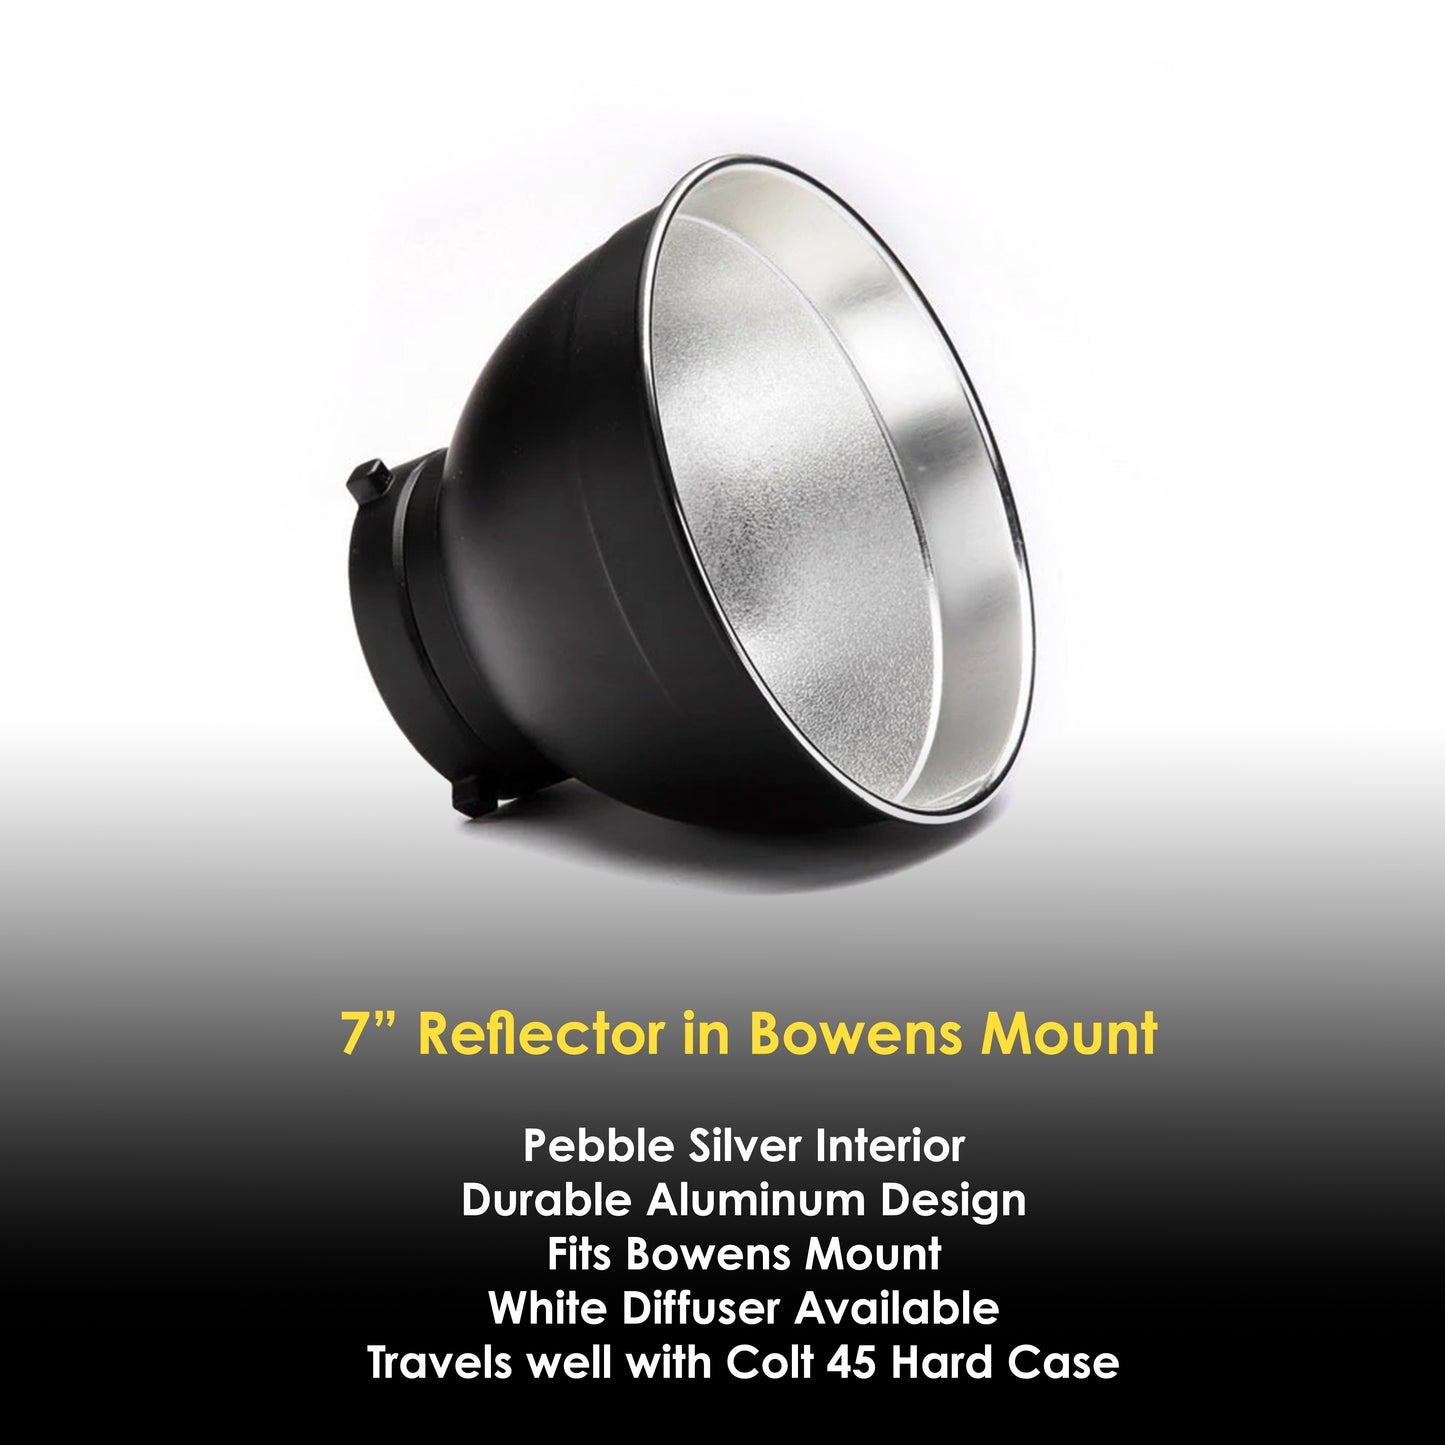 7" Reflector with Bowens Mount